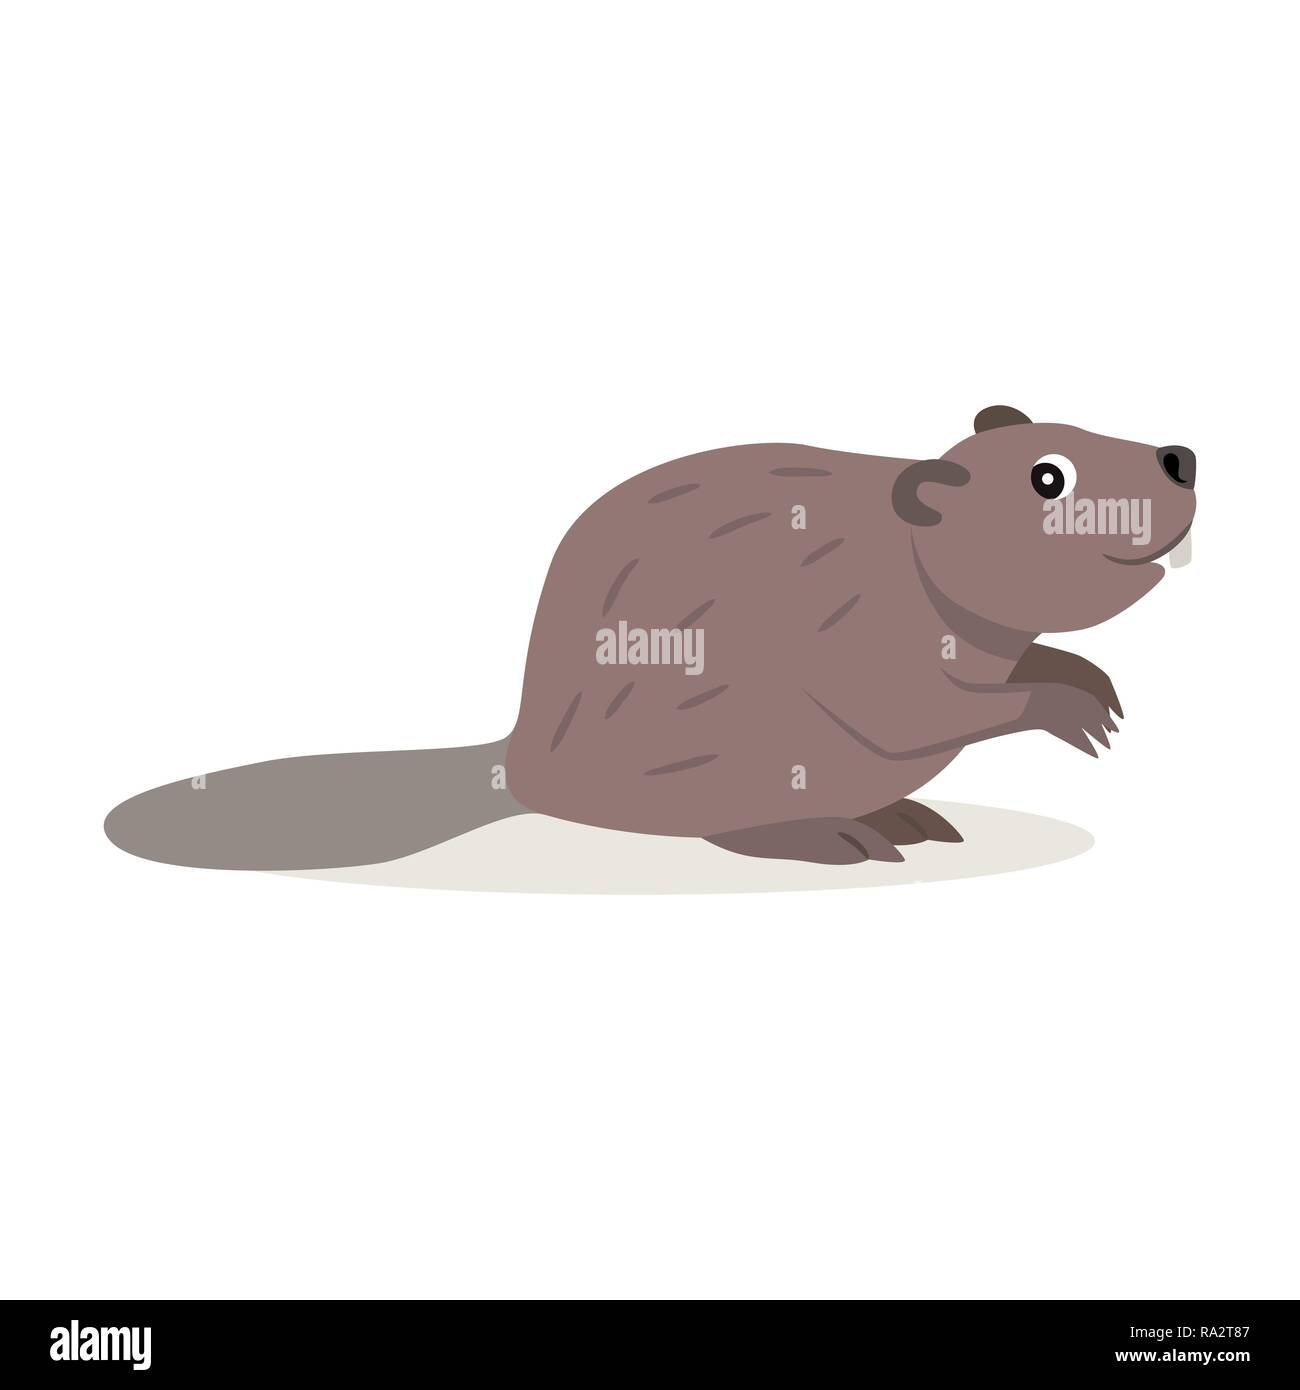 Friendly forest animal, cute brown beaver icon isolated Stock Vector